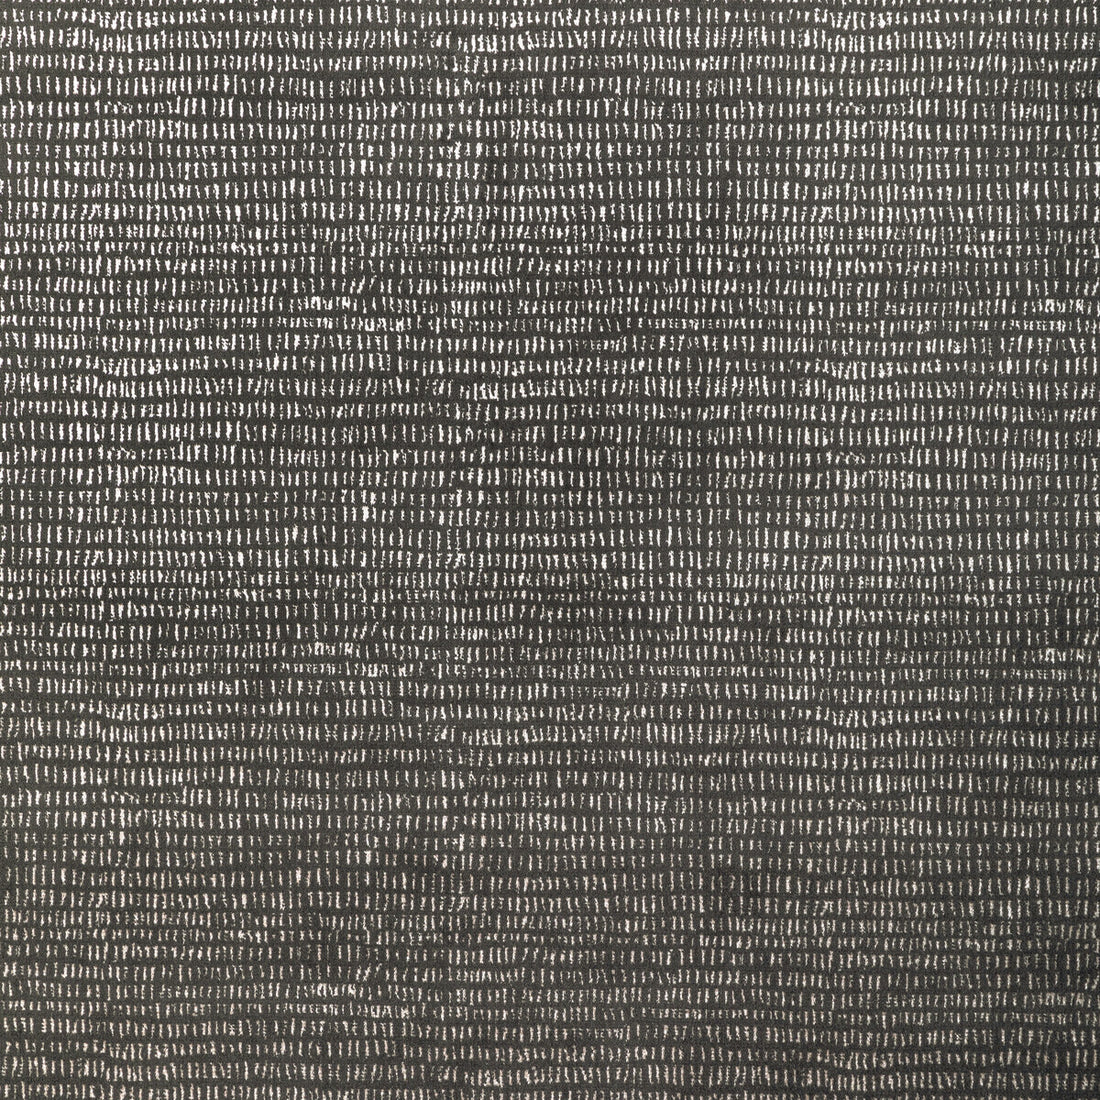 Flashback fabric in zinc color - pattern 36042.21.0 - by Kravet Contract